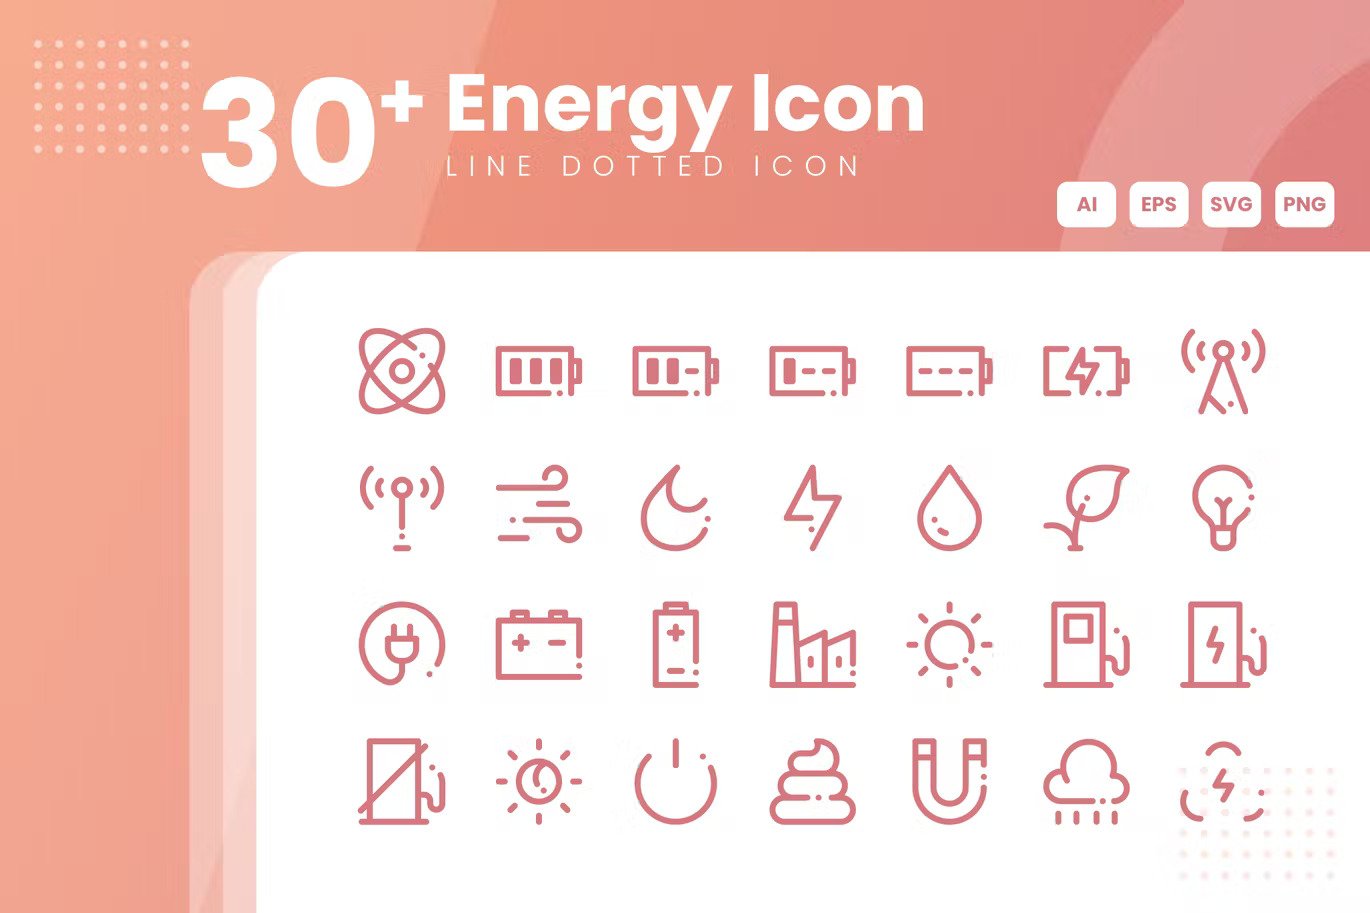 A pack of energy icons